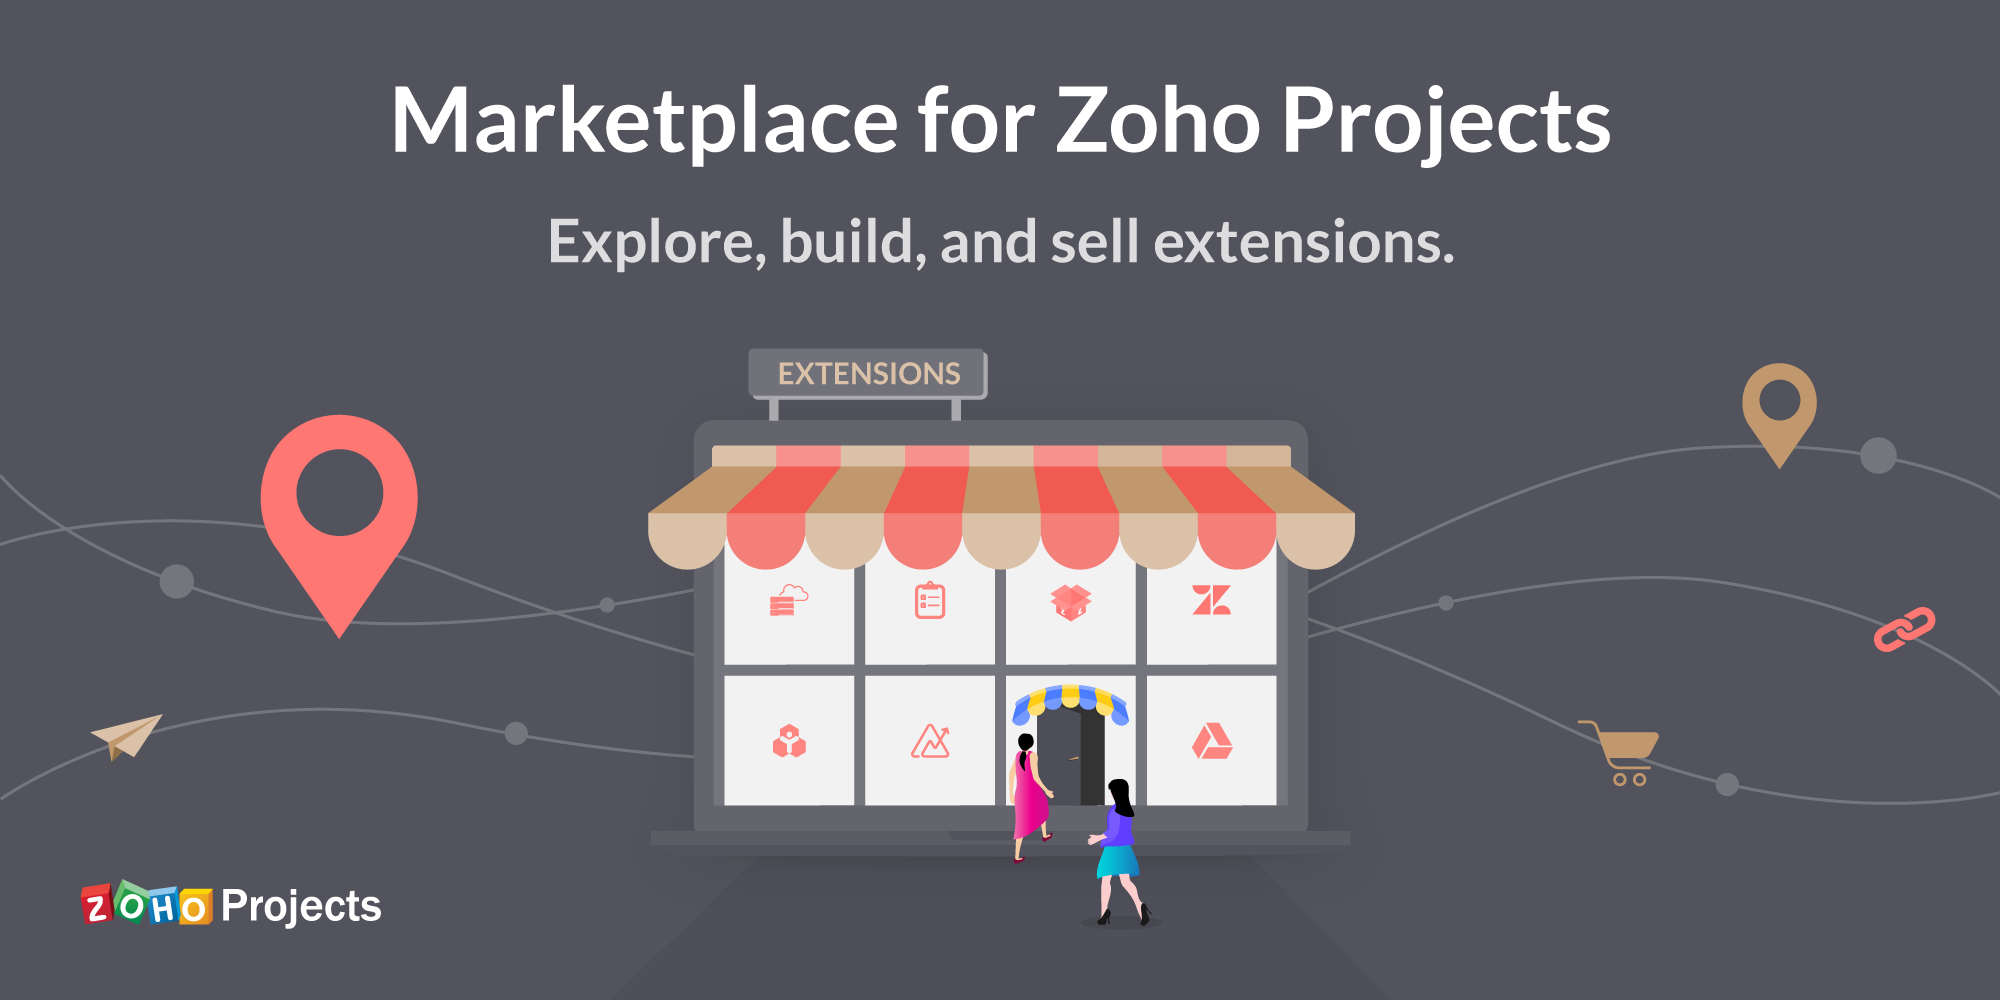 Explore, build, sell— Introducing Marketplace for Zoho Projects